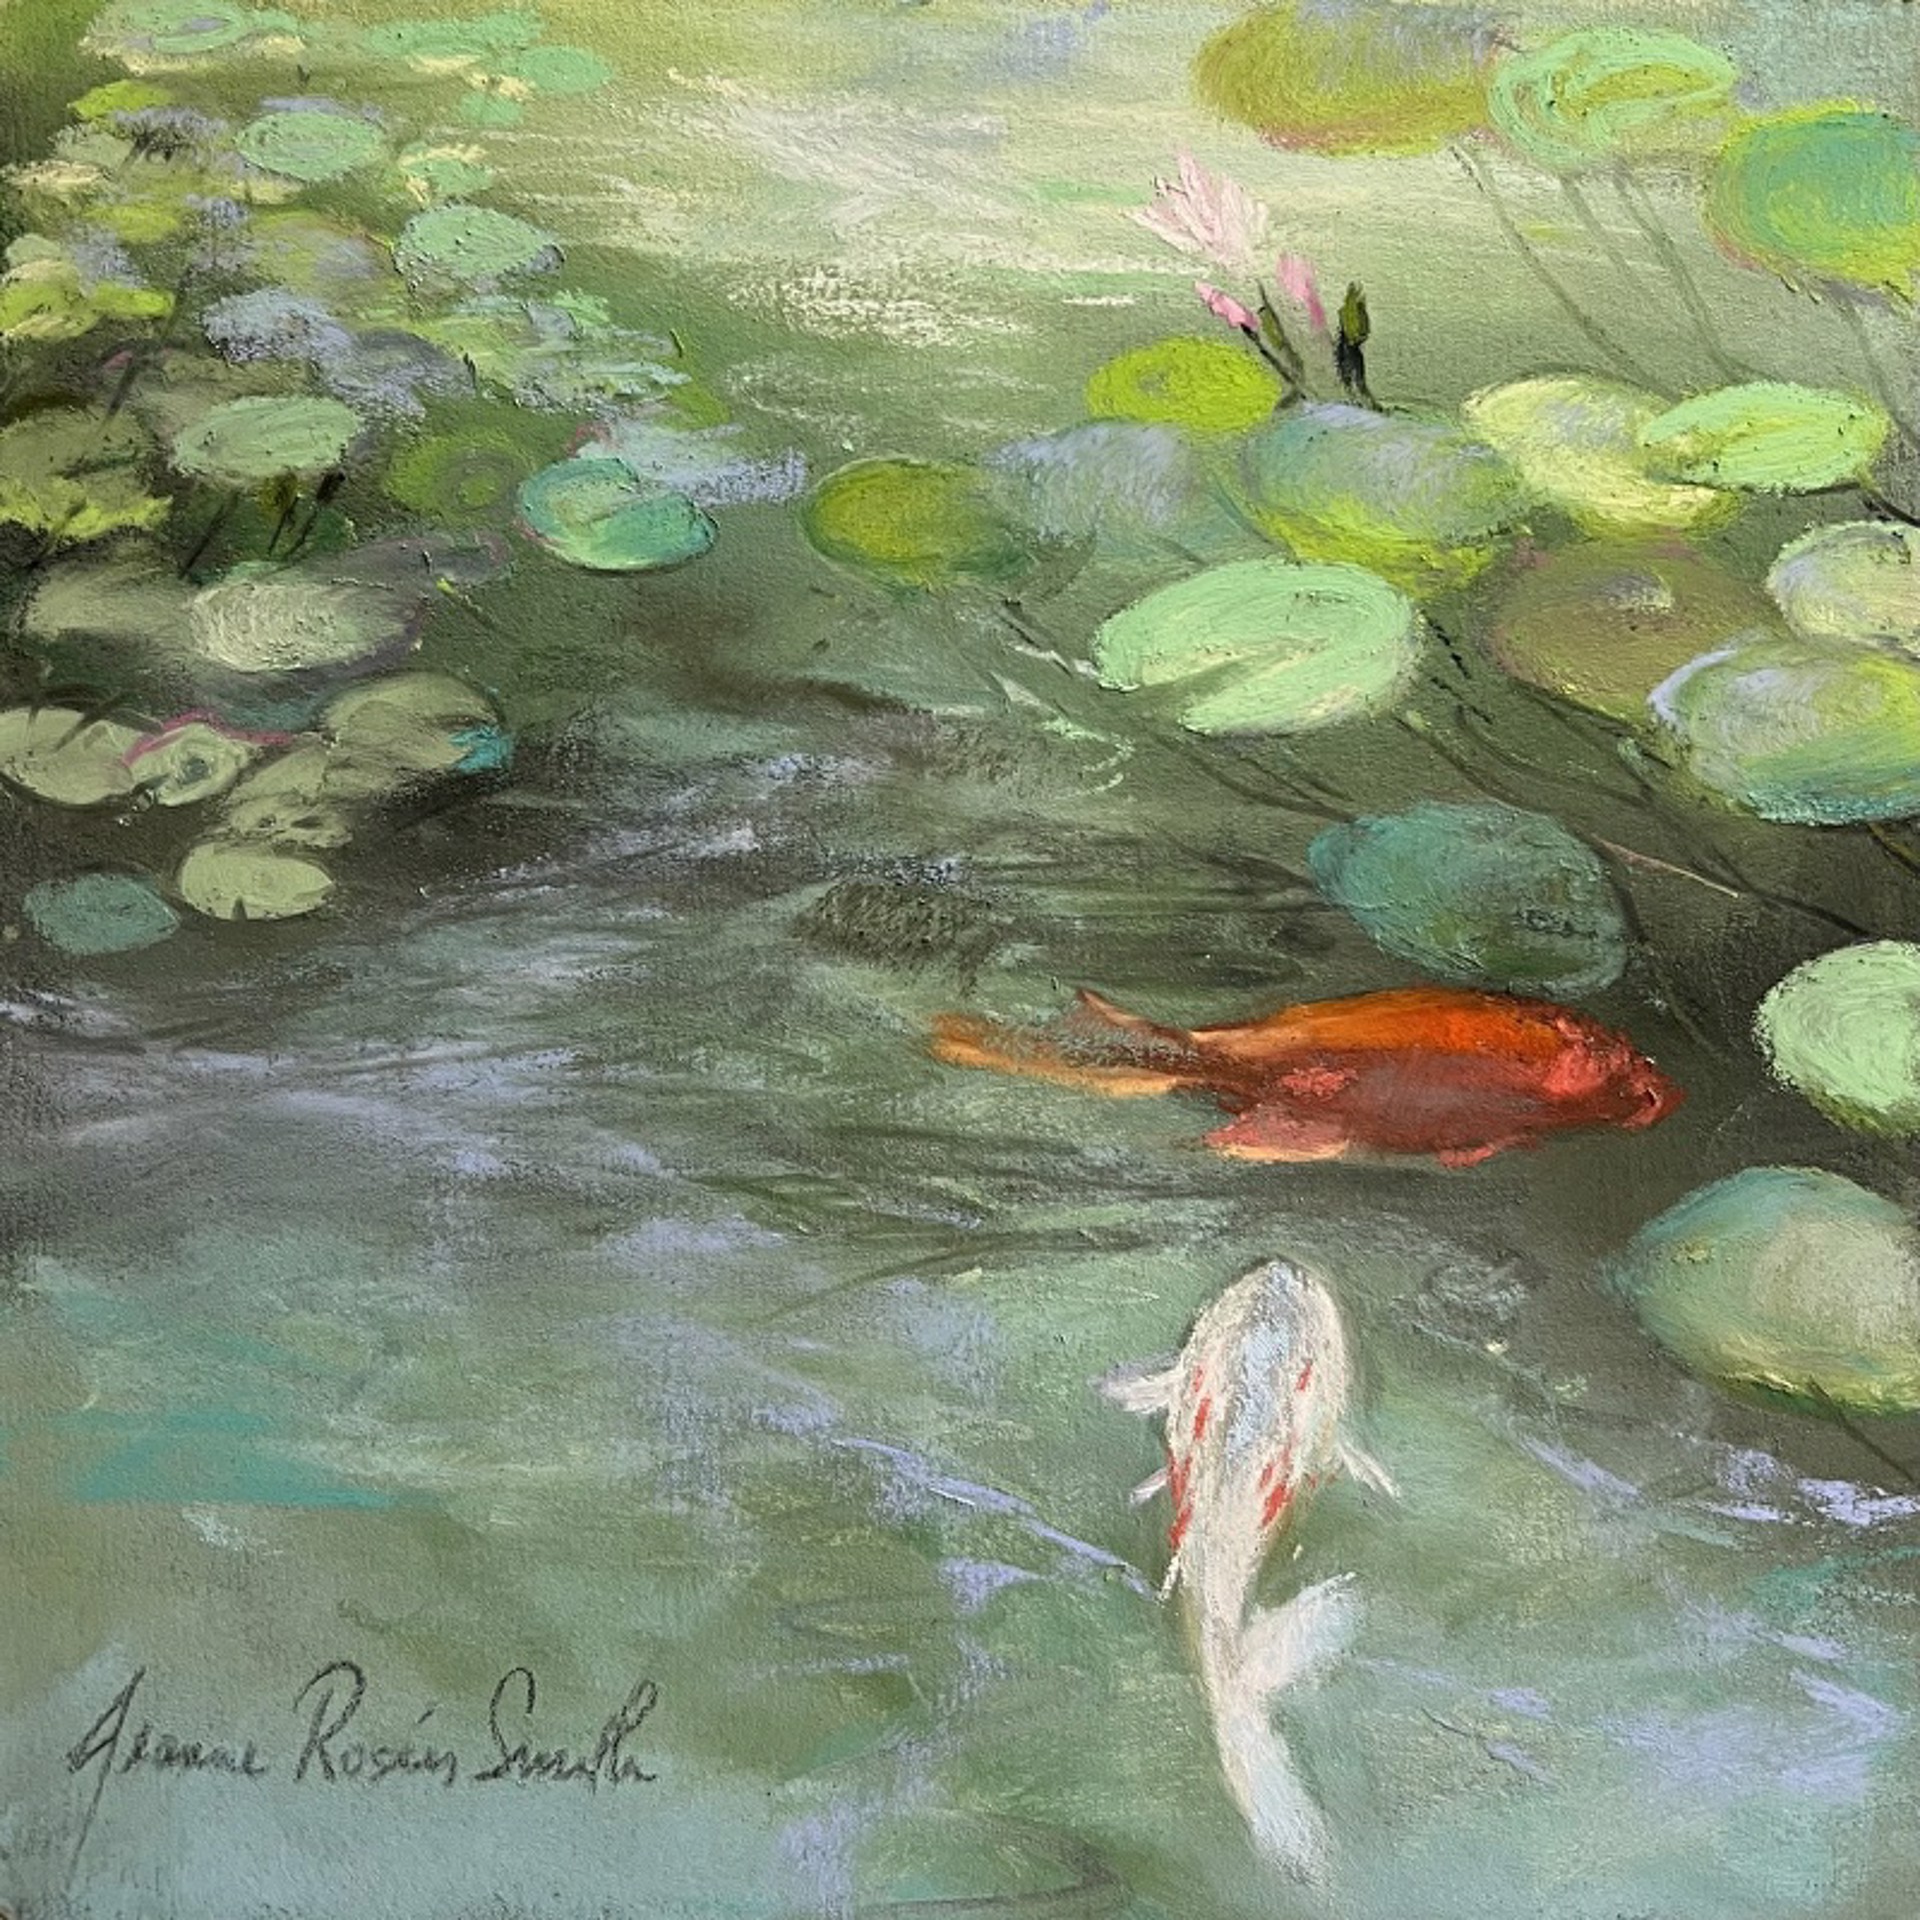 Two Fish by Jeanne Rosier Smith